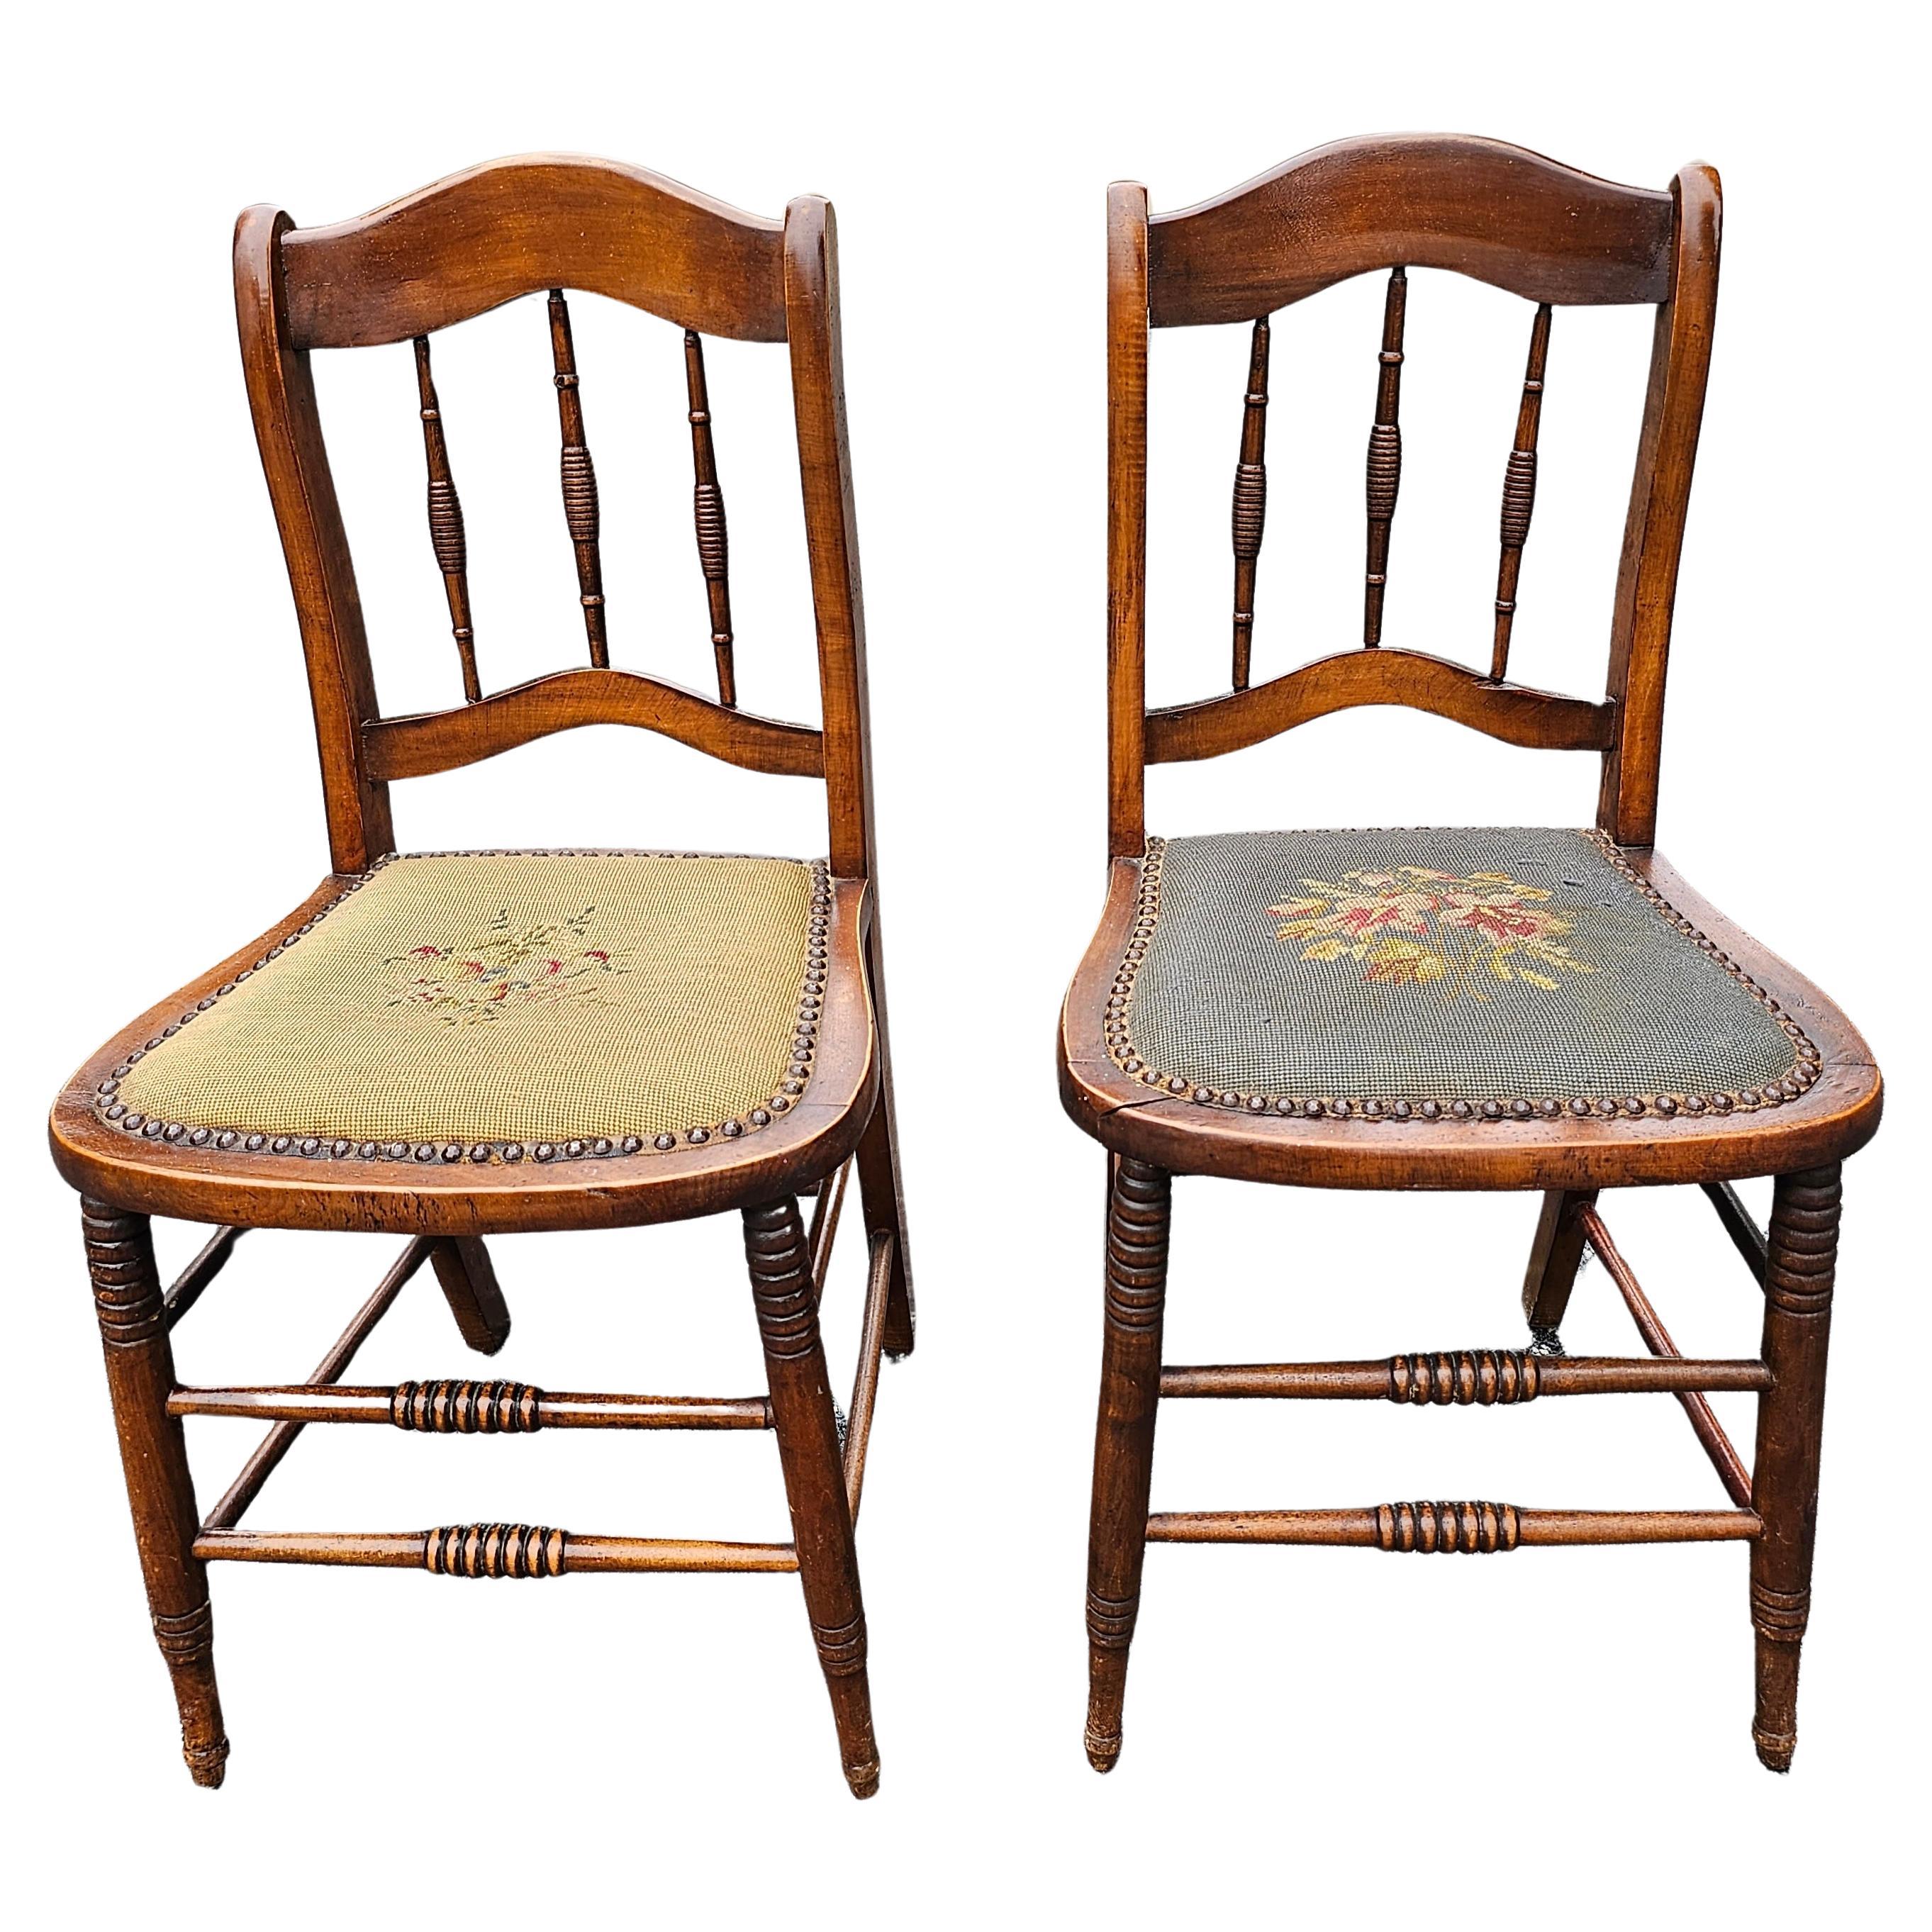 Pair of 19th Century Victorian  American Walnut and Needlepoint Upholstered Seat Side Chairs. Measures 17